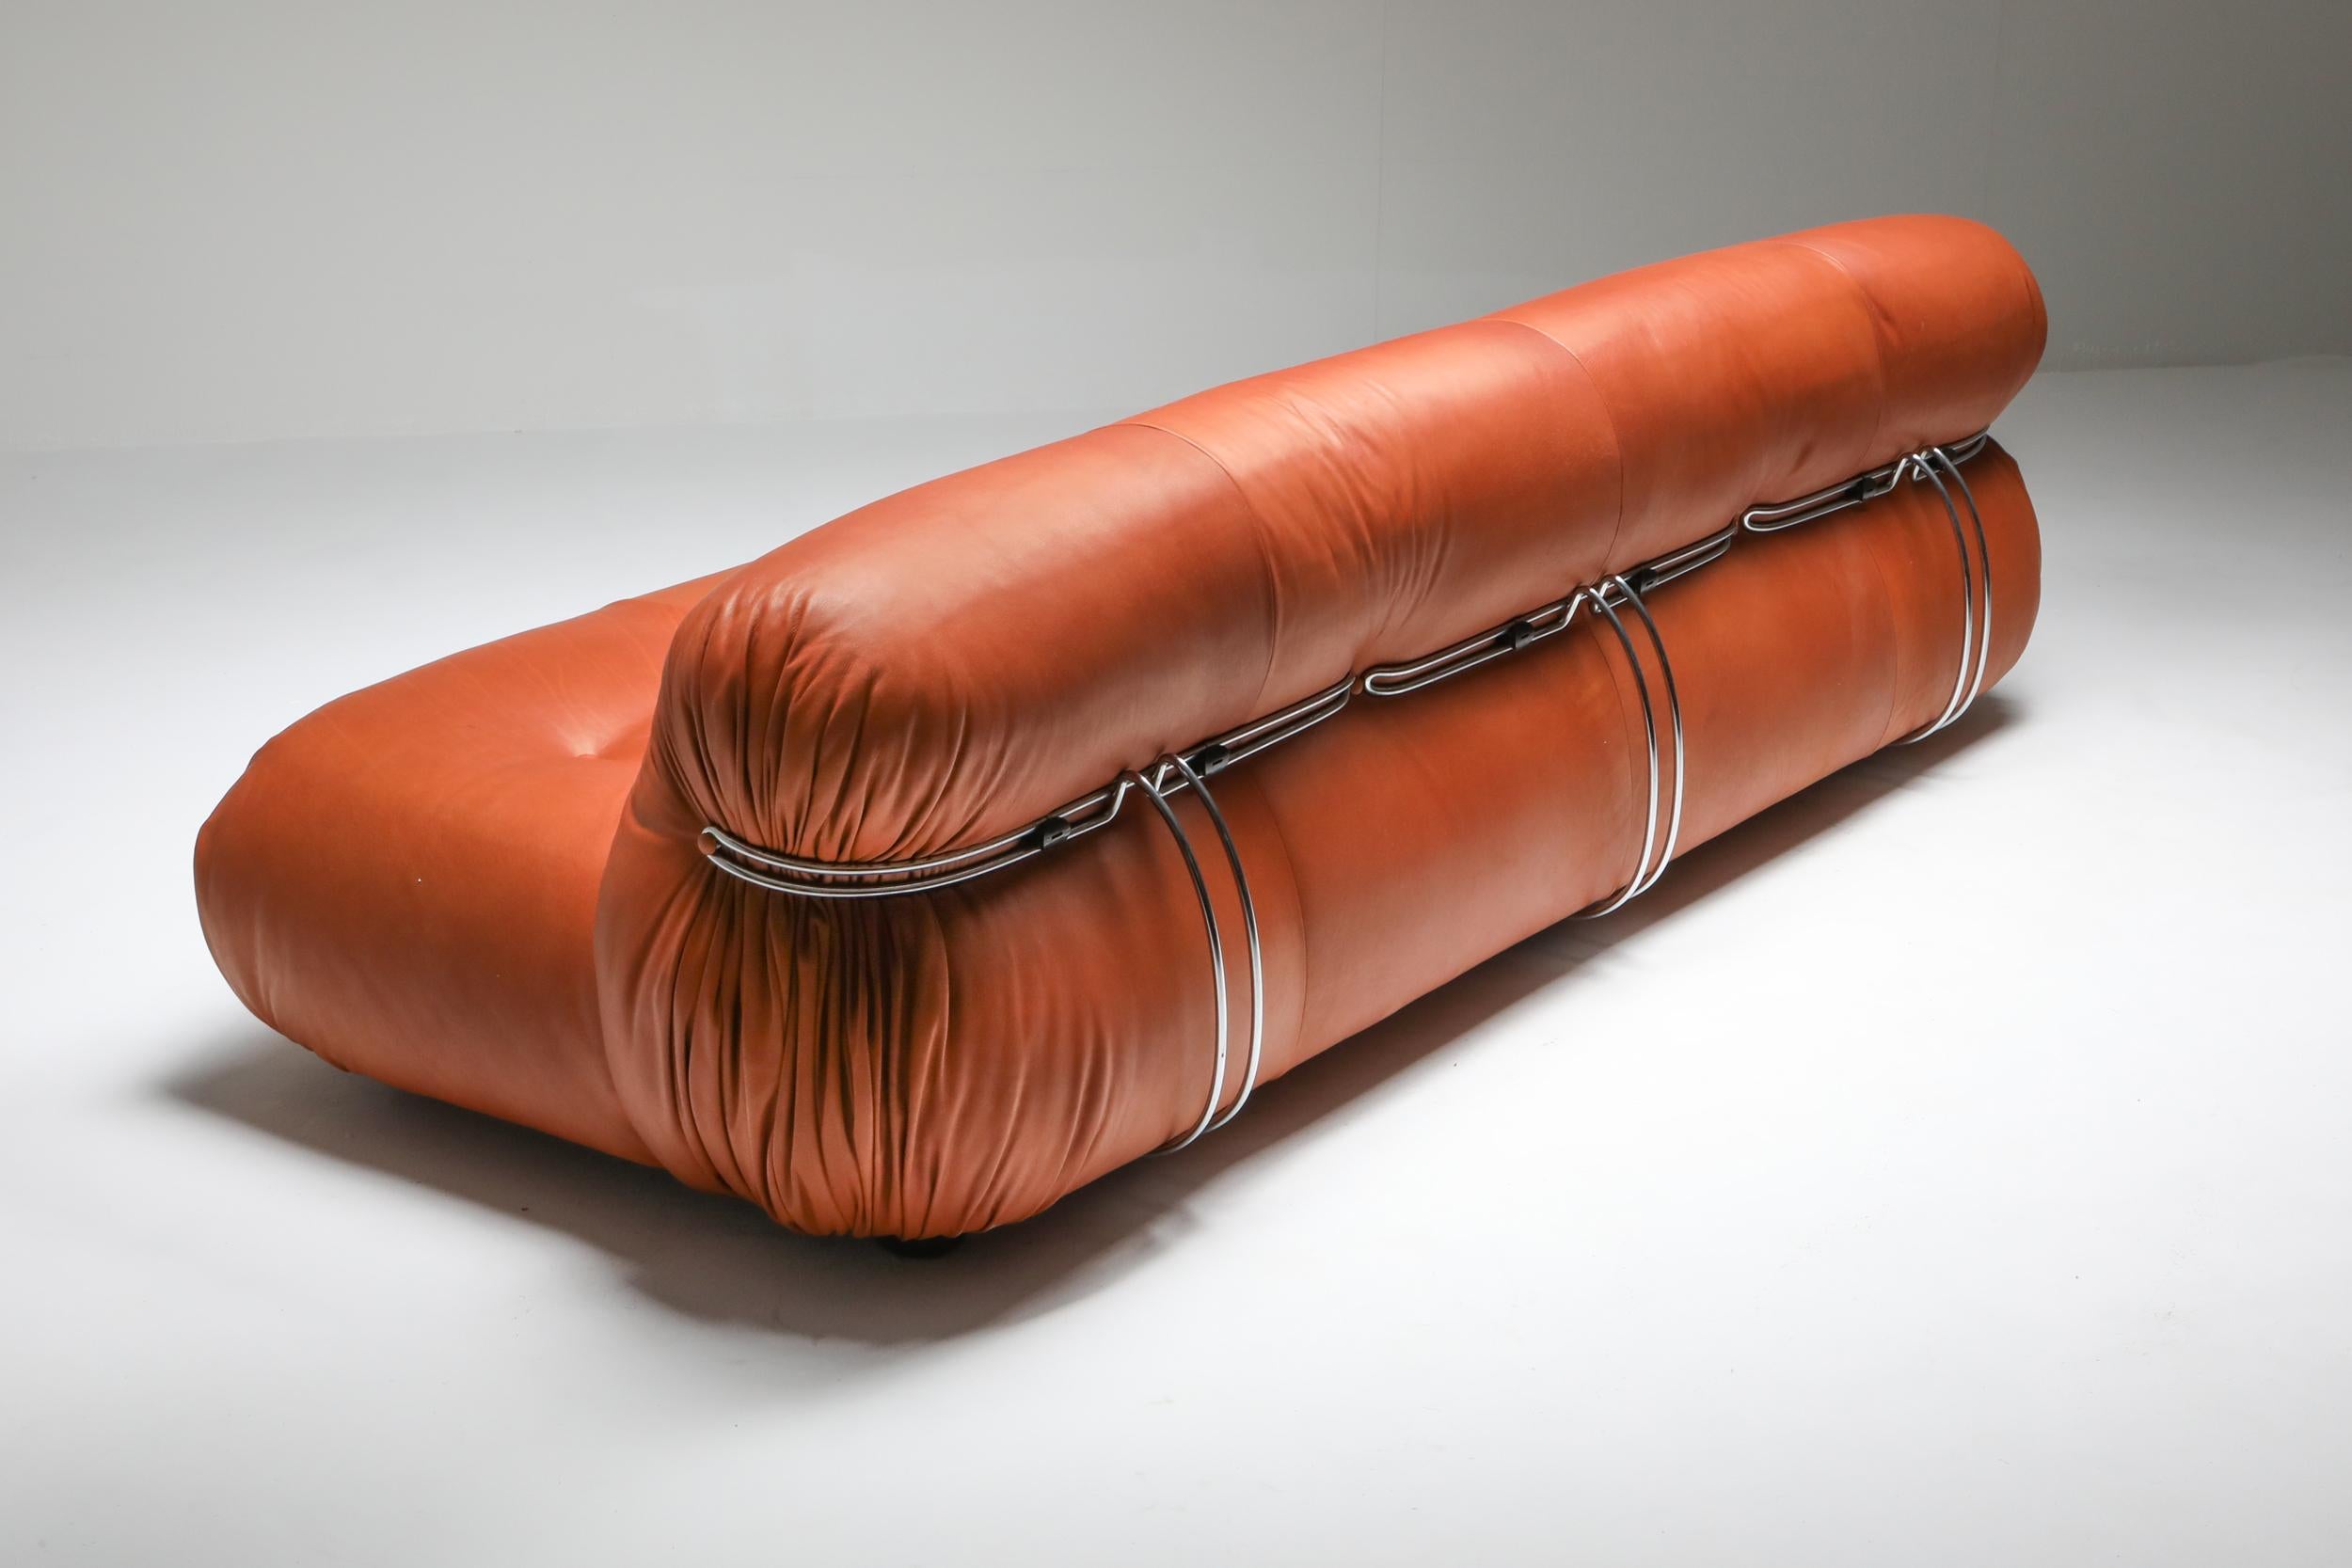 Cassina 'Soriana' Cognac Leather Sofa by Afra and Tobia Scarpa, 1970s In Excellent Condition For Sale In Antwerp, BE